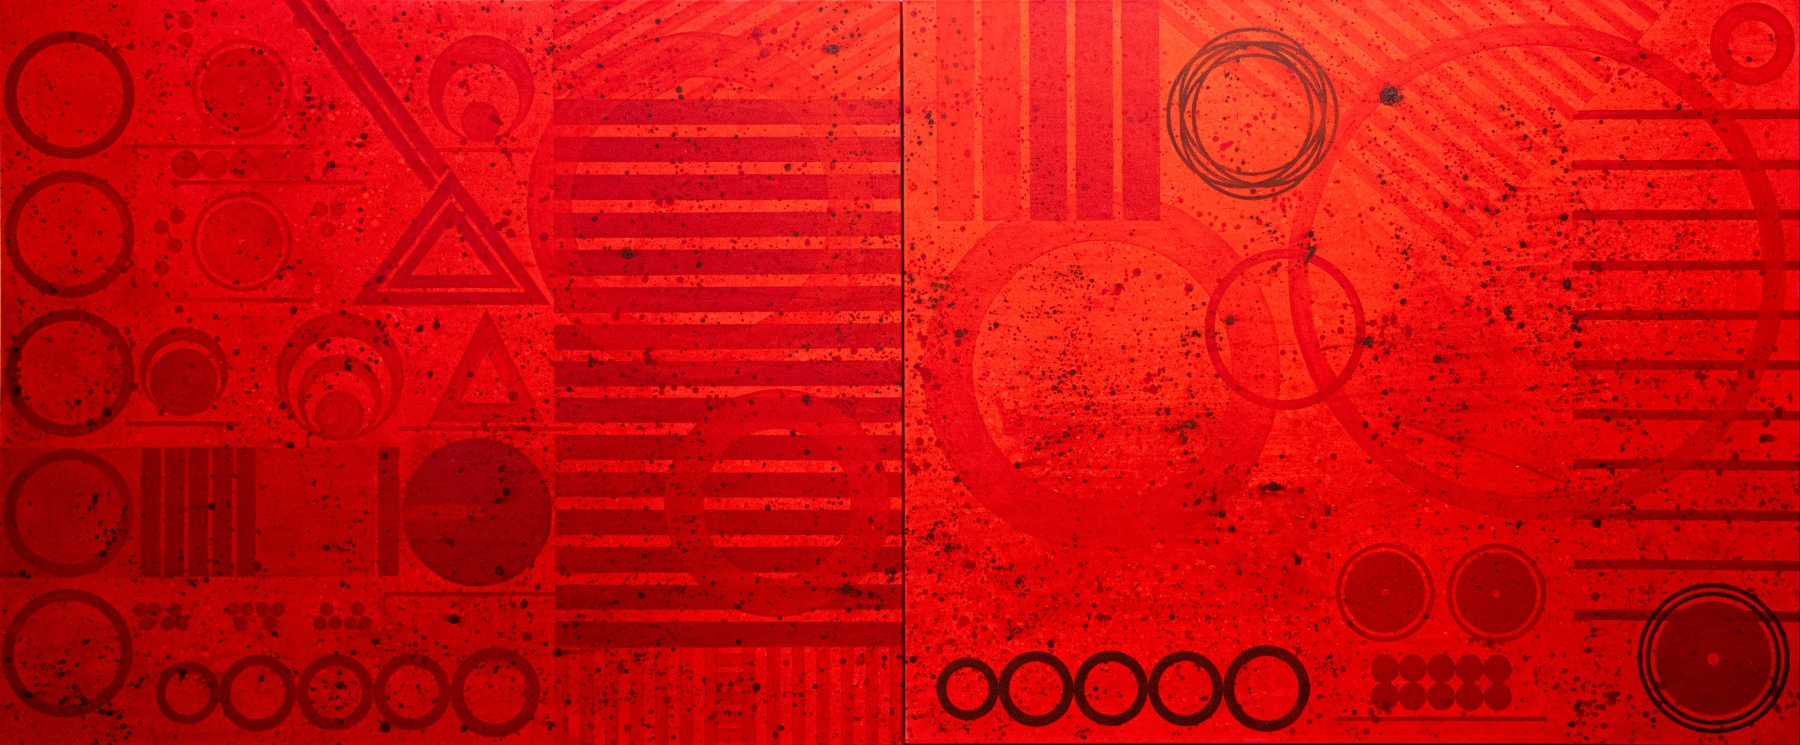 J. Steven Manolis, REDWORLD GLAZE (Self Portrait), 2020, 60 x 144 inches, Acrylic on Canvas, Red Abstract Art, Large Abstract Wall Art for sale at Manolis Projects Art Gallery, Miami, Fl